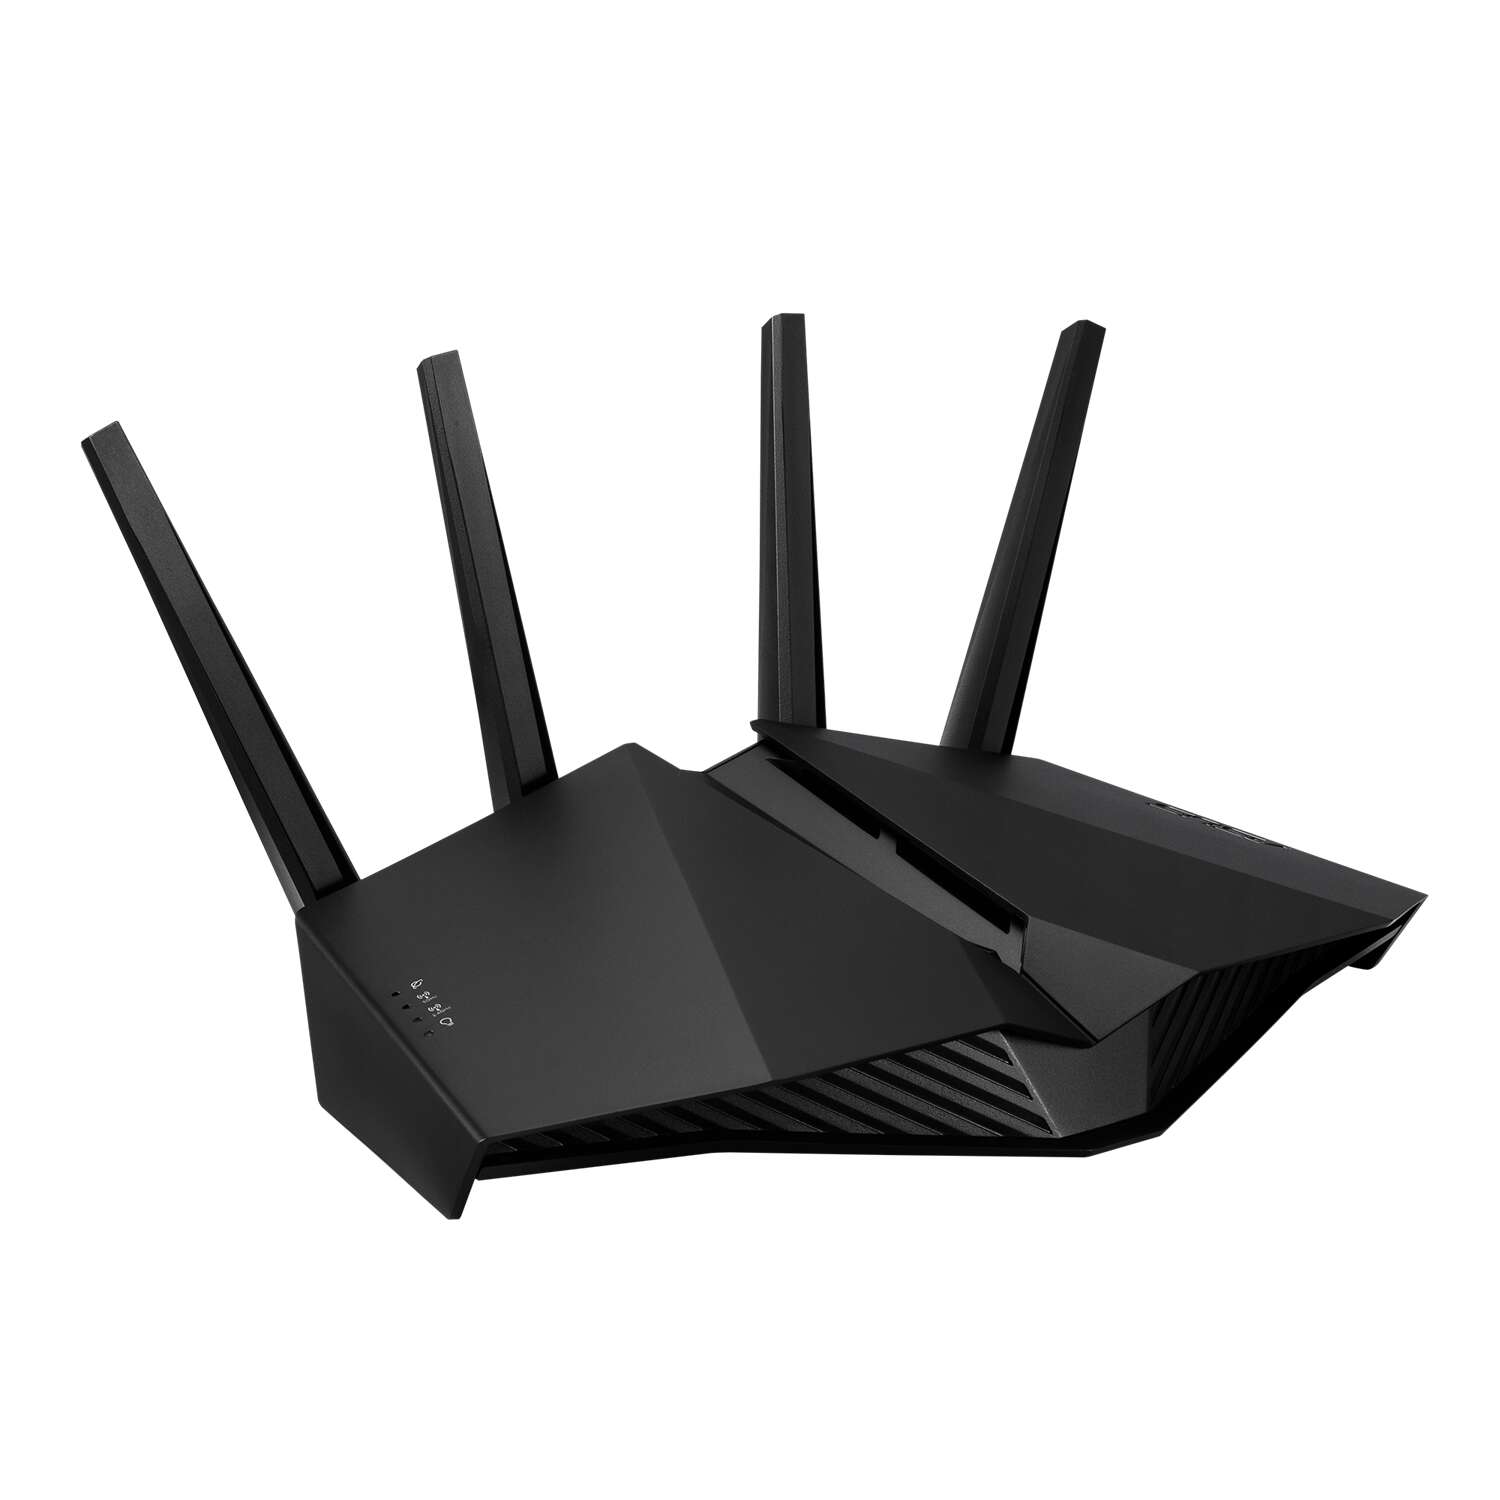 Asus wireless router dual band ax5400 1xwan(1000mbps) + 4xlan(100...